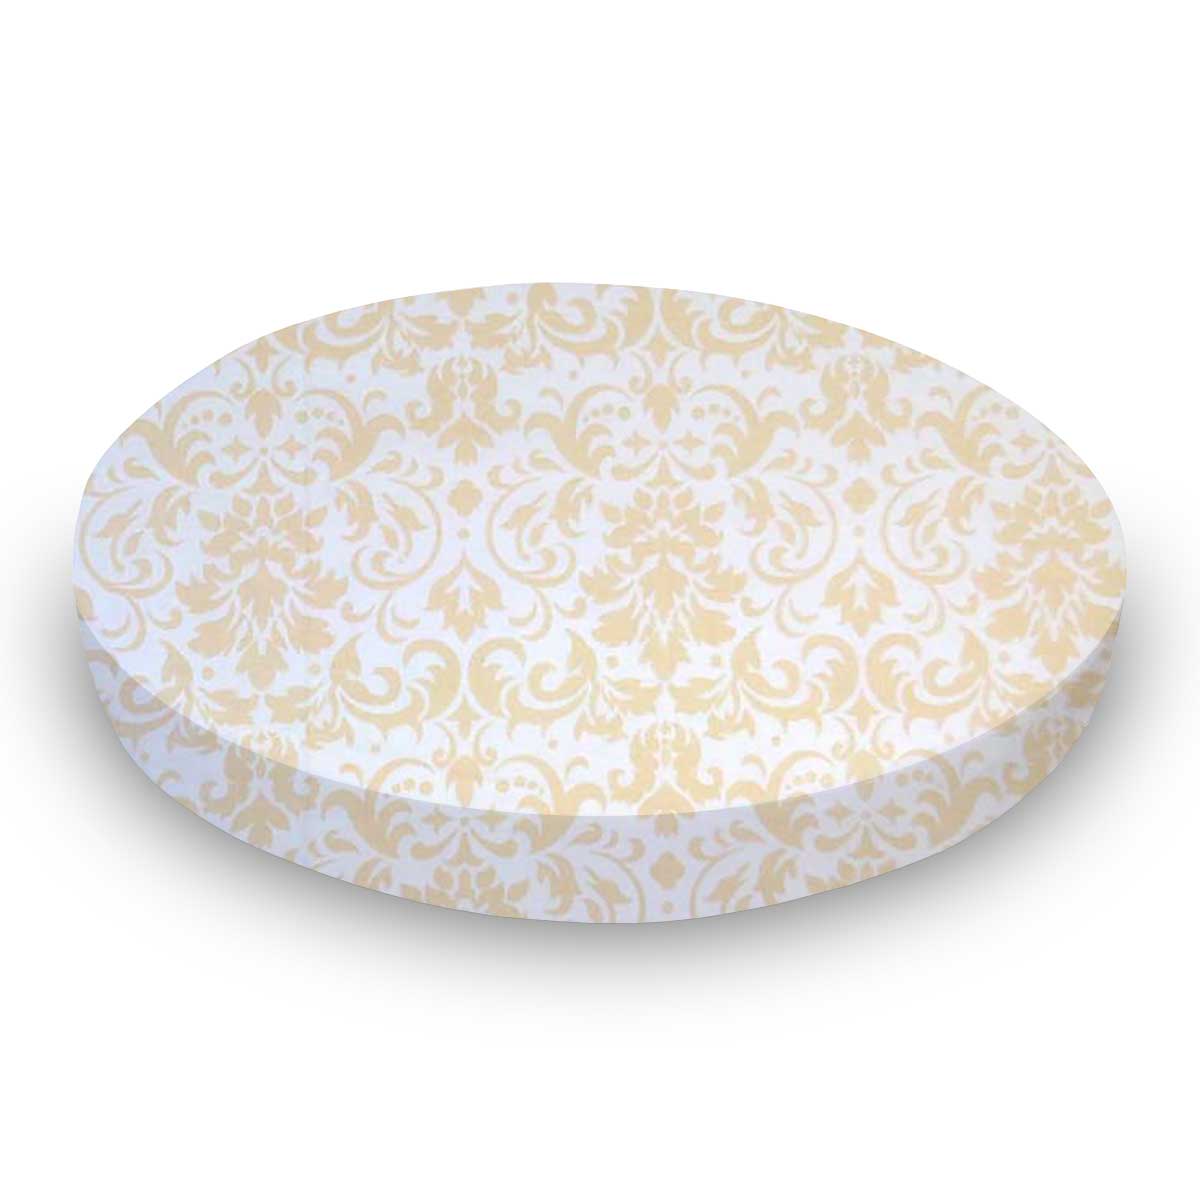 Oval (Stokke Mini) - Cream Damask - Fitted  Oval